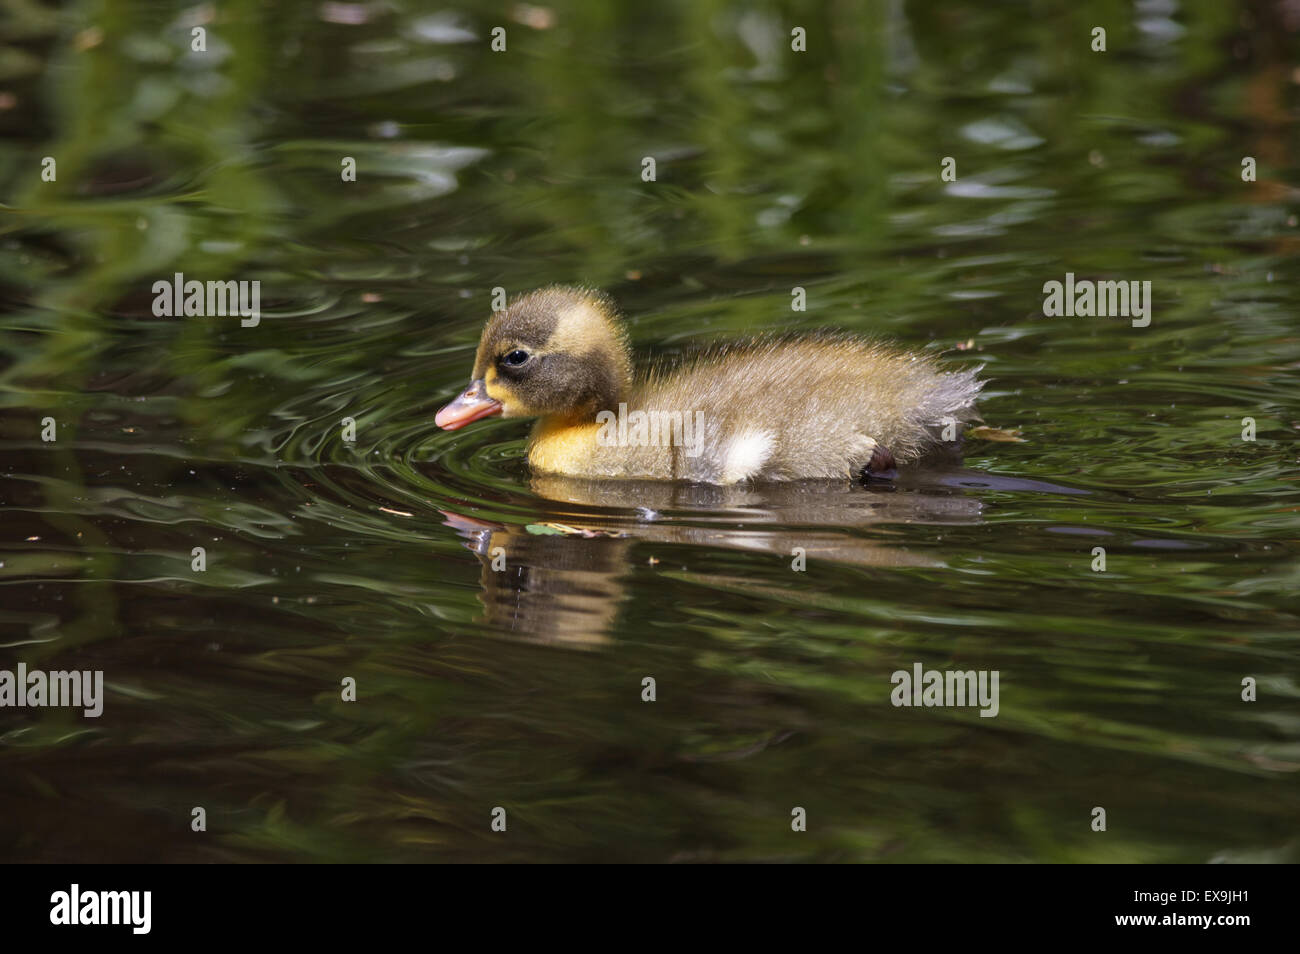 baby duckling swimming in the water with green reflections Stock Photo